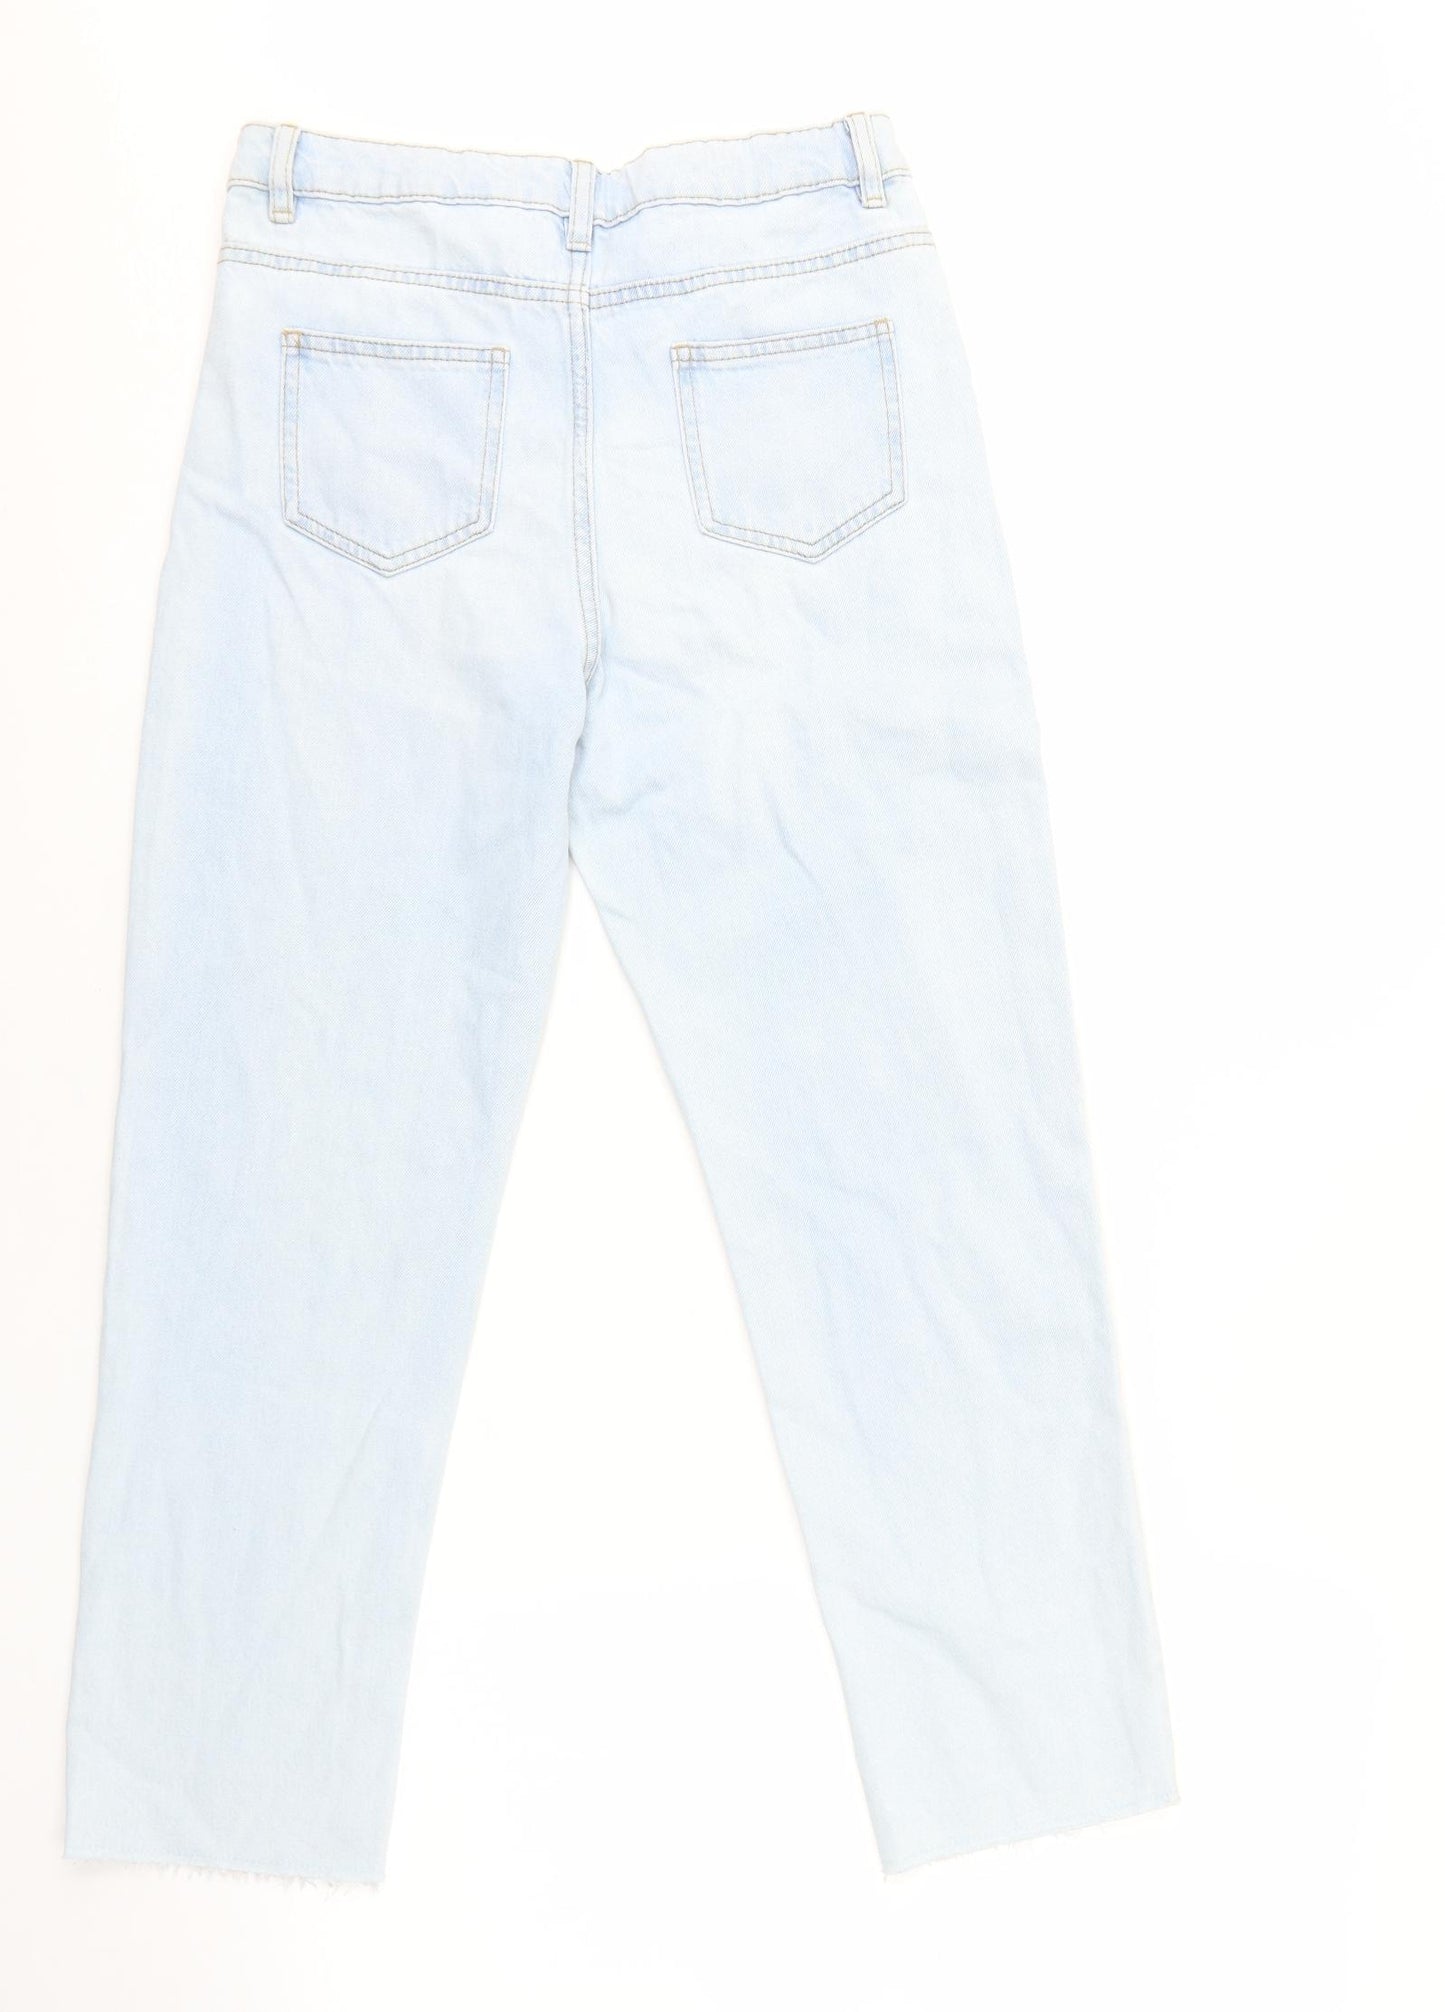 Marks and Spencer Girls Blue Cotton Straight Jeans Size 12-13 Years L24.5 in Regular Zip